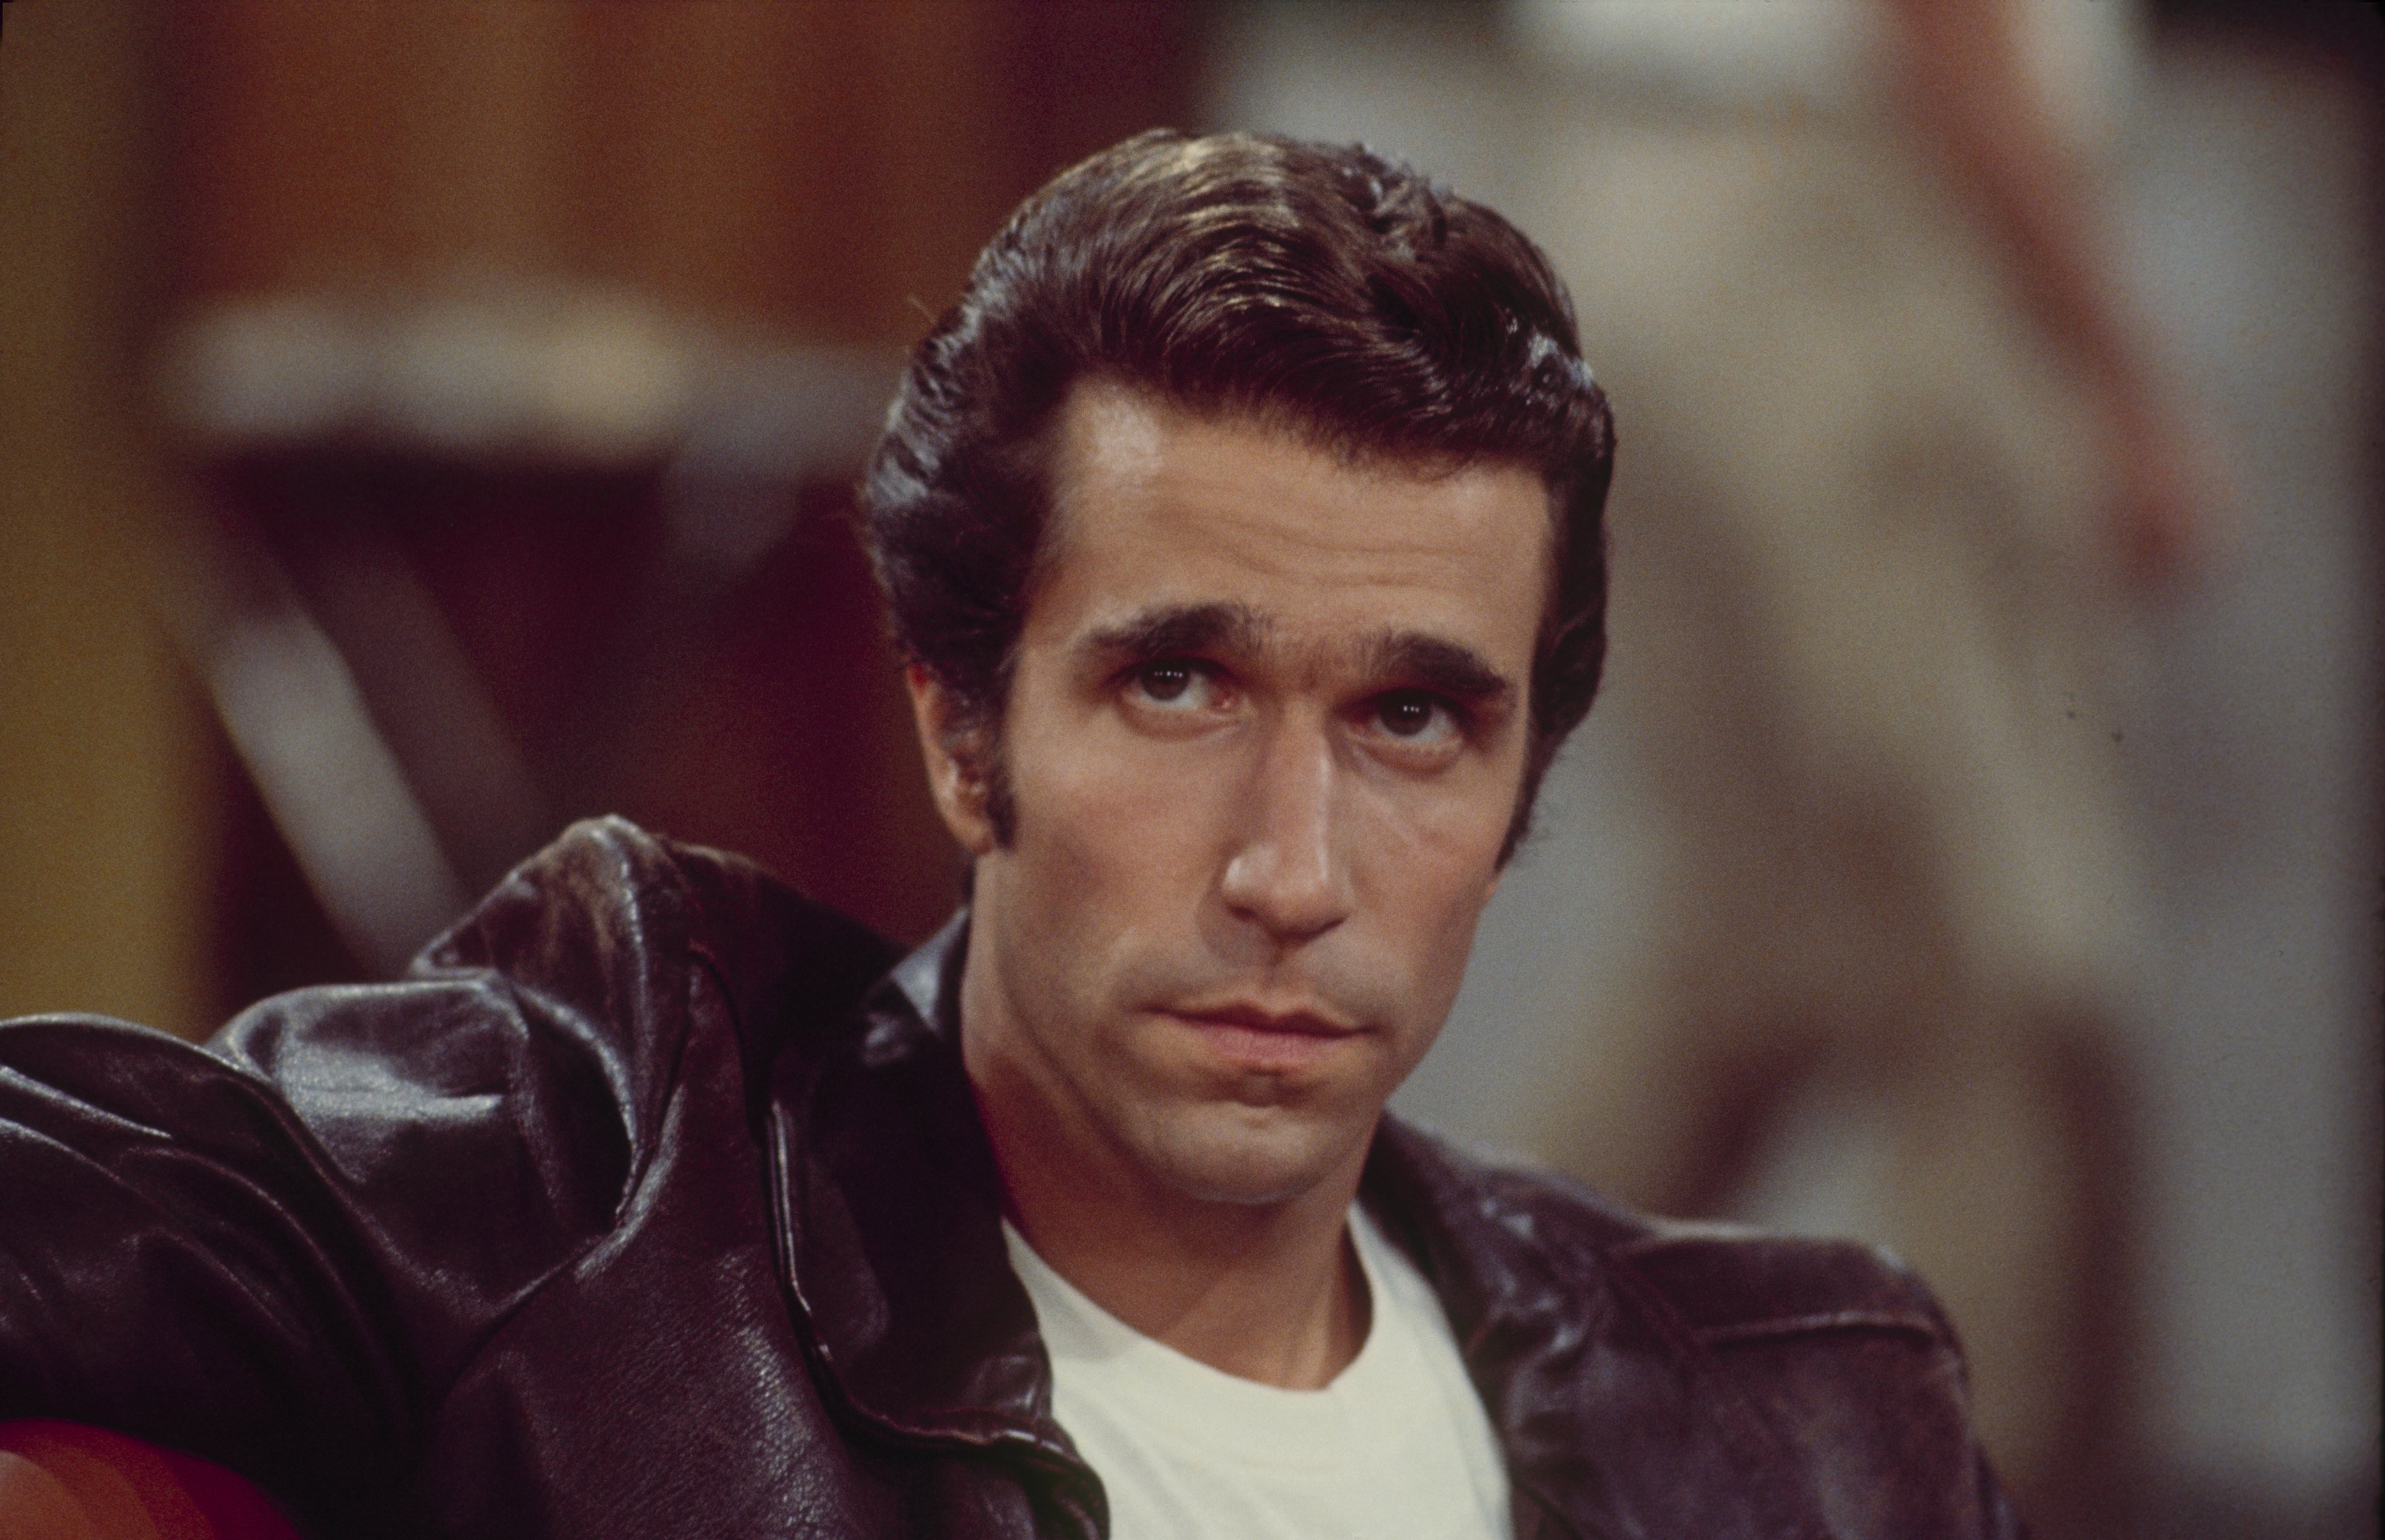 Henry Winkle as Fonzie in "Happy Days" in 1979 | Source: Getty Images